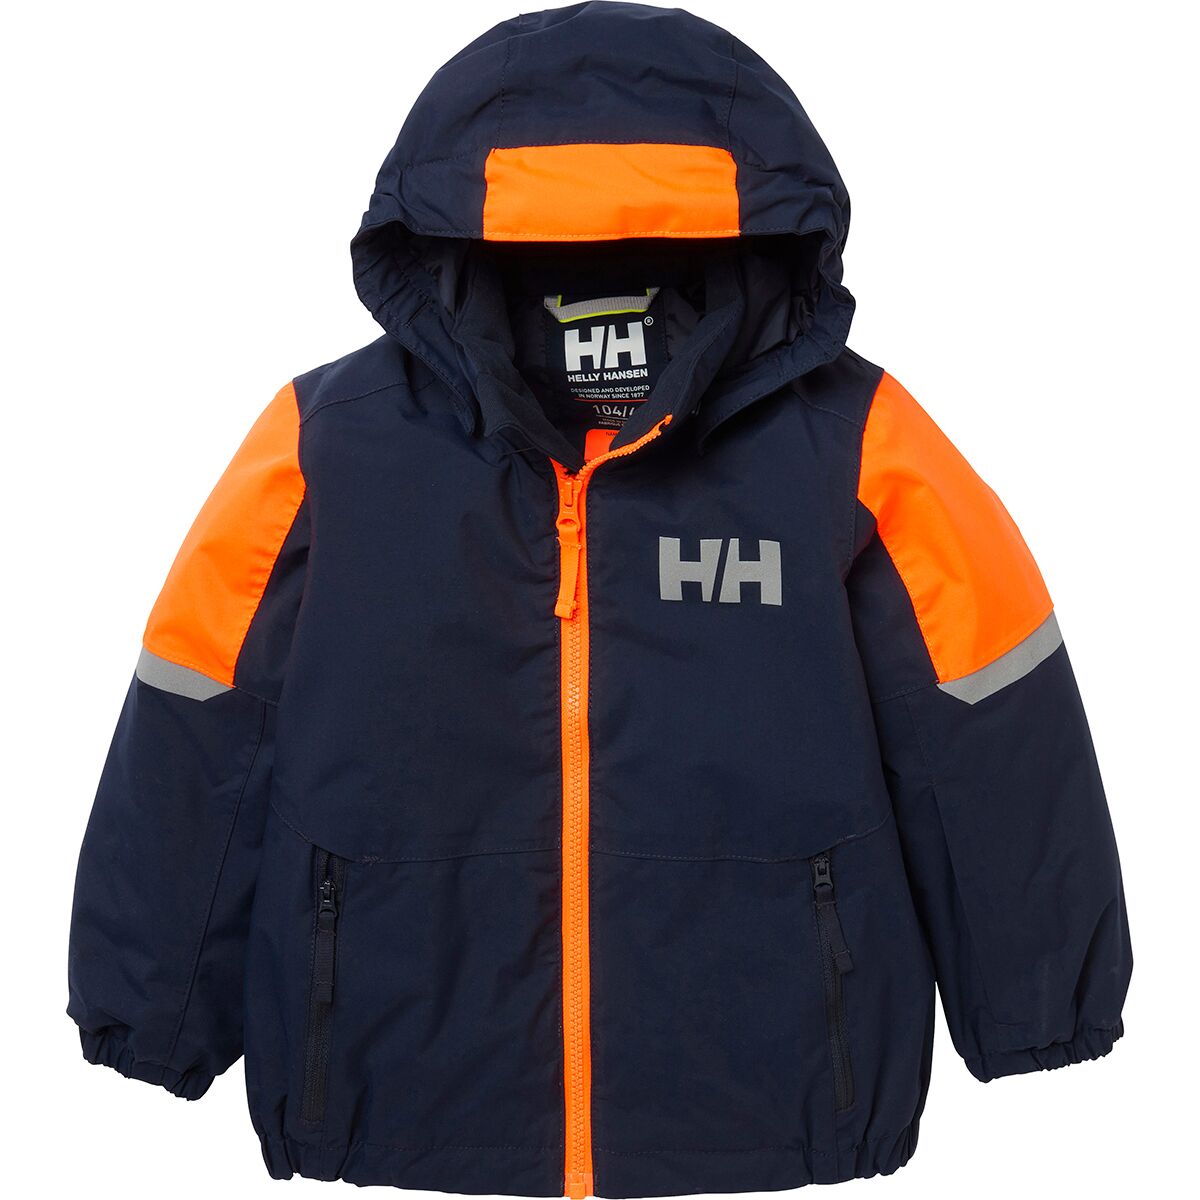 Helly Hansen Rider 2.0 Insulated Jacket - Toddlers'